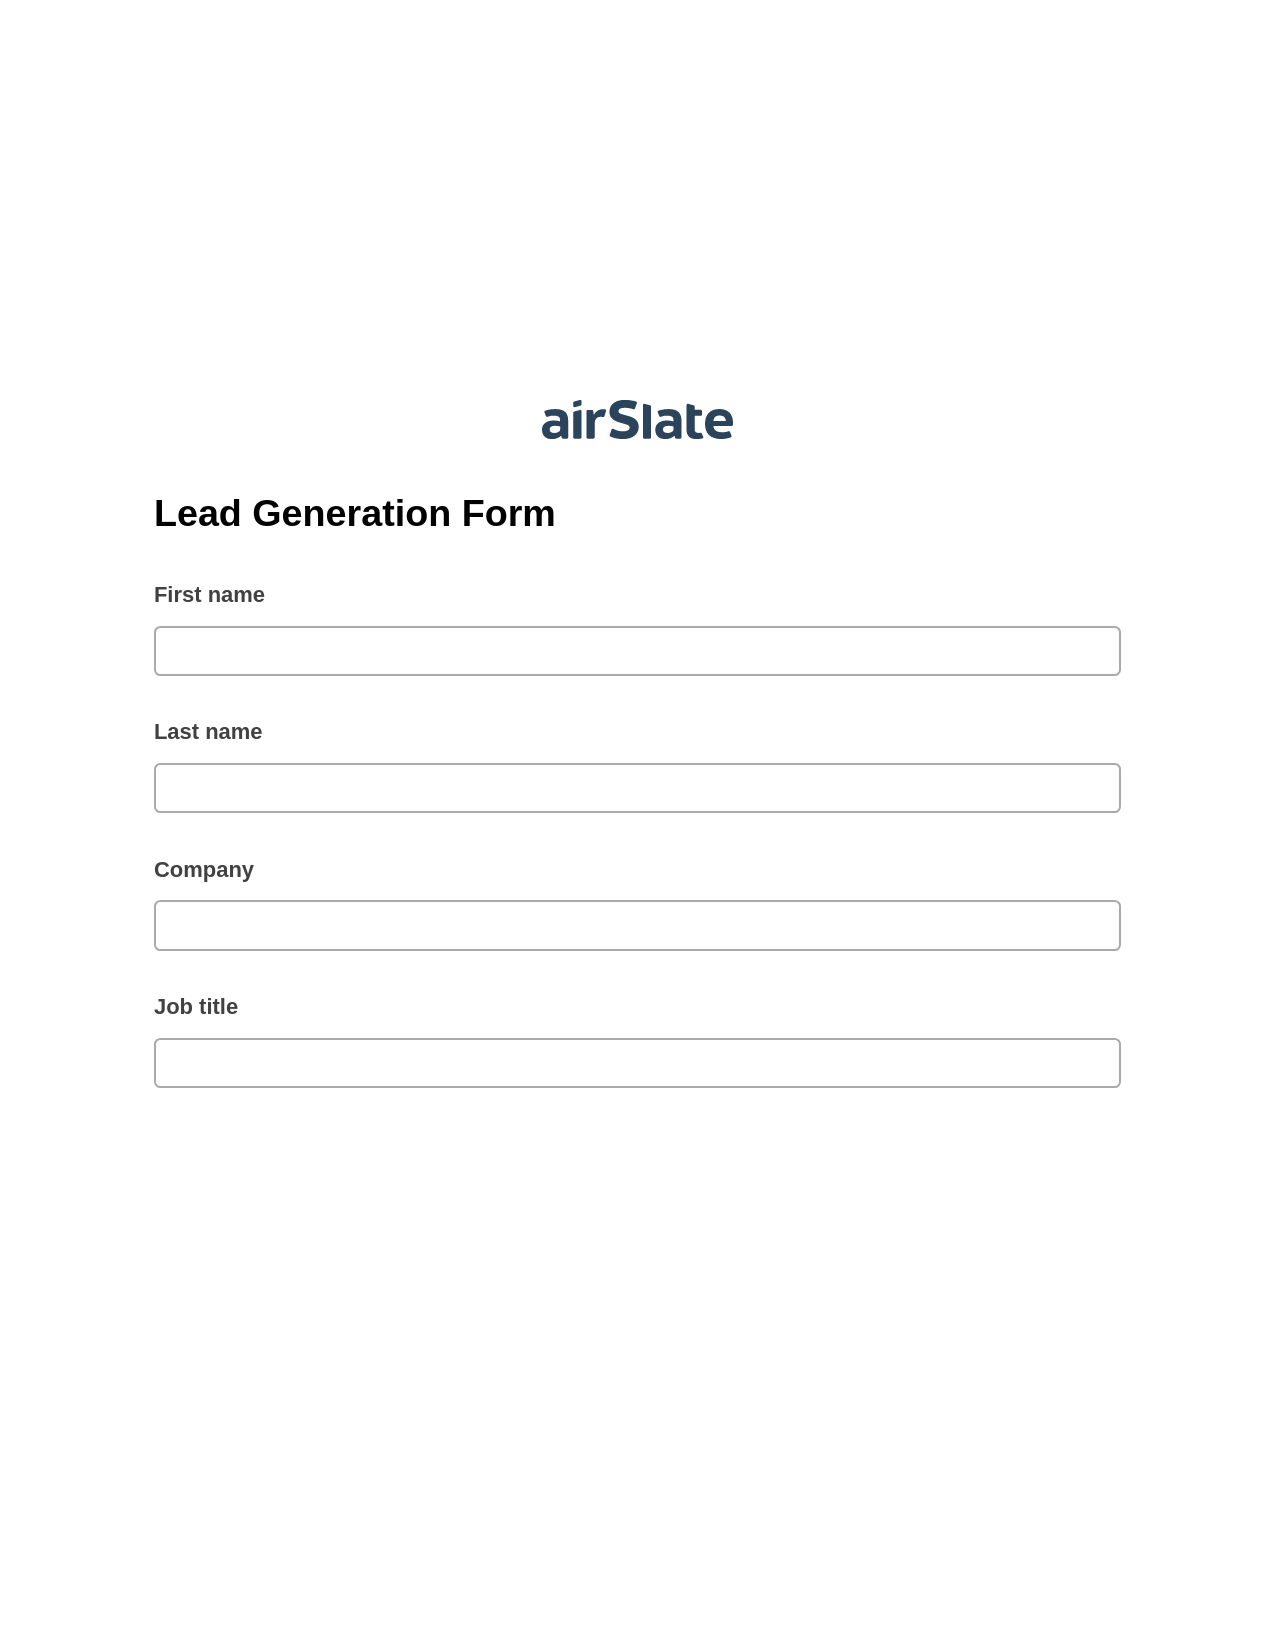 Lead Generation Form Pre-fill Document Bot, Send a Slate with Roles Bot, Archive to Box Bot